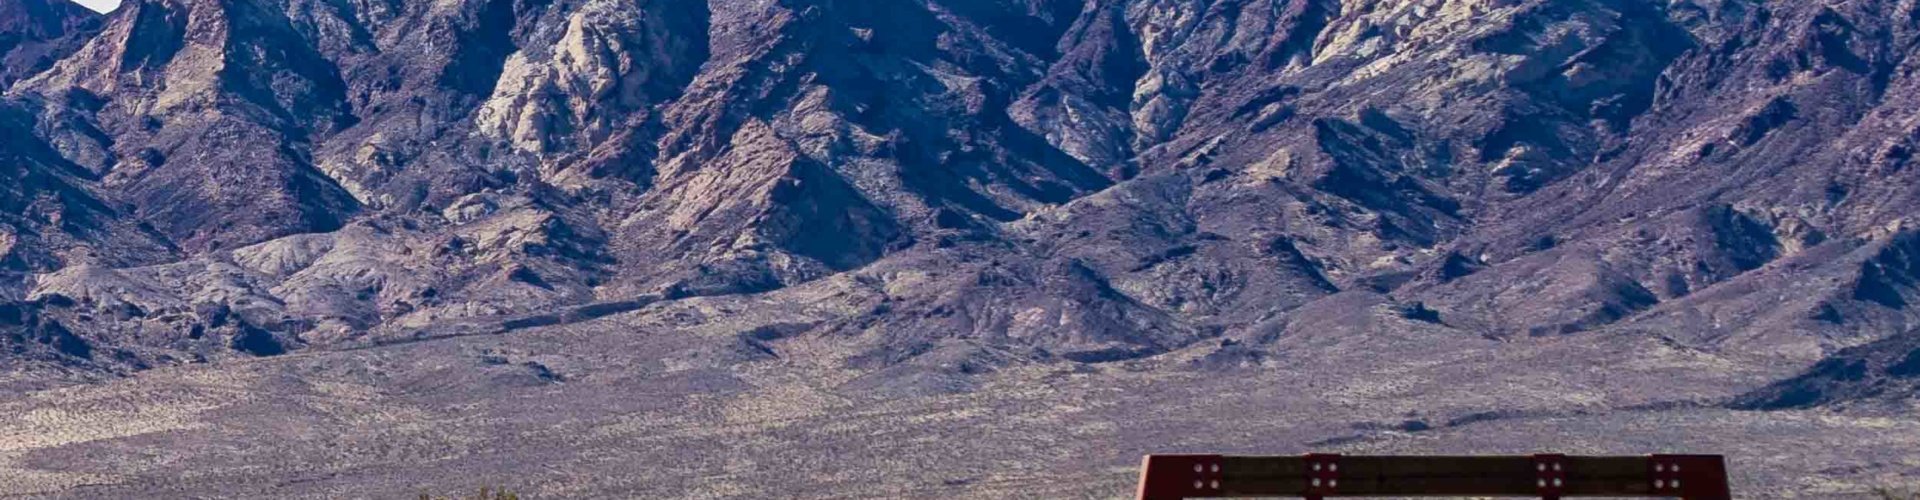 Escape the Chill: 5 Reasons to Visit Death Valley This Winter.